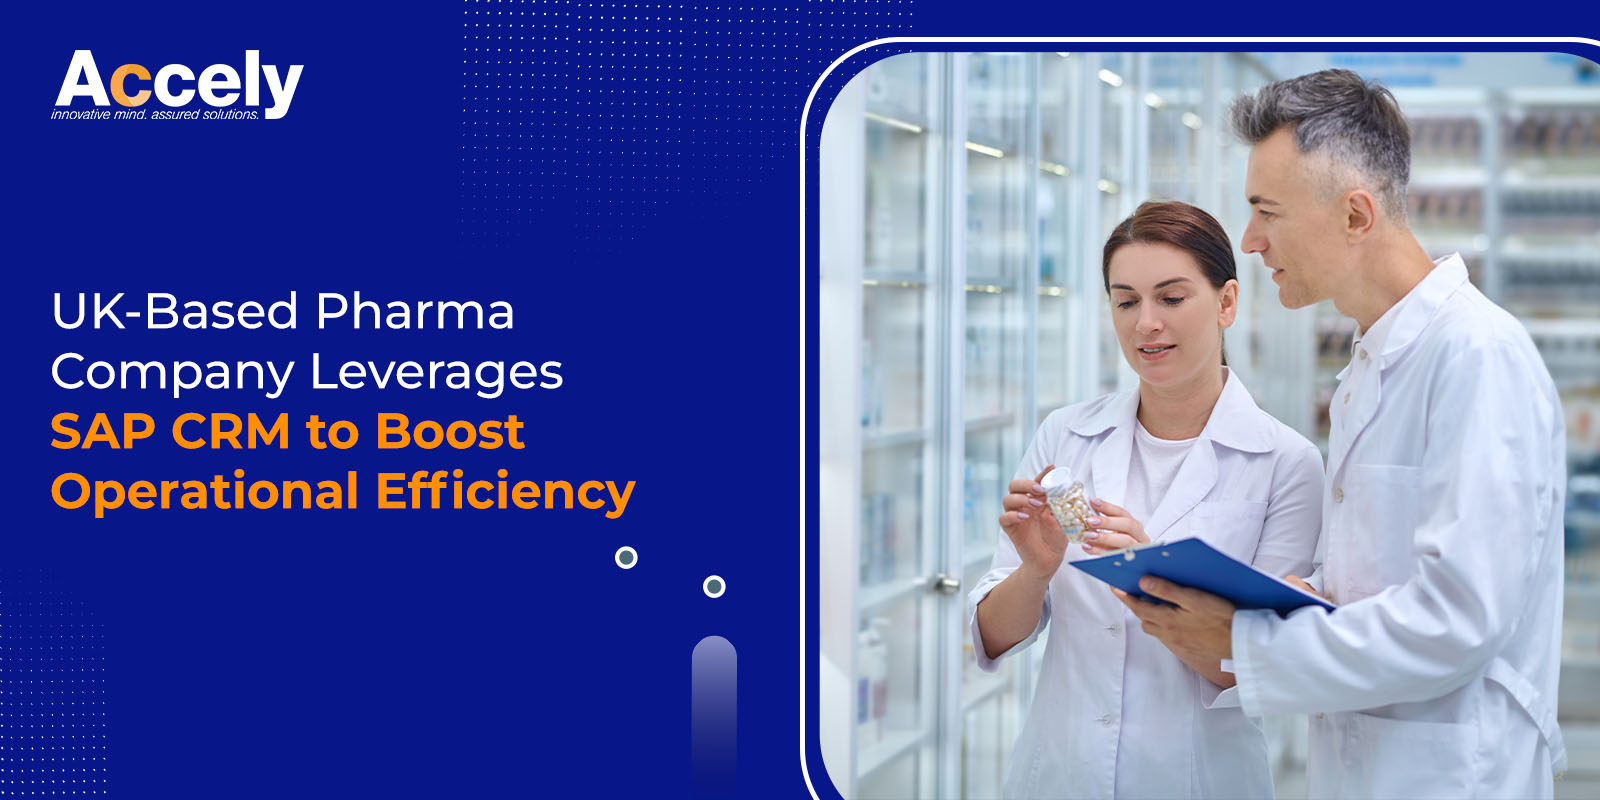 UK-Based Pharma Company Leverages SAP CRM to Boost Operational Efficiency